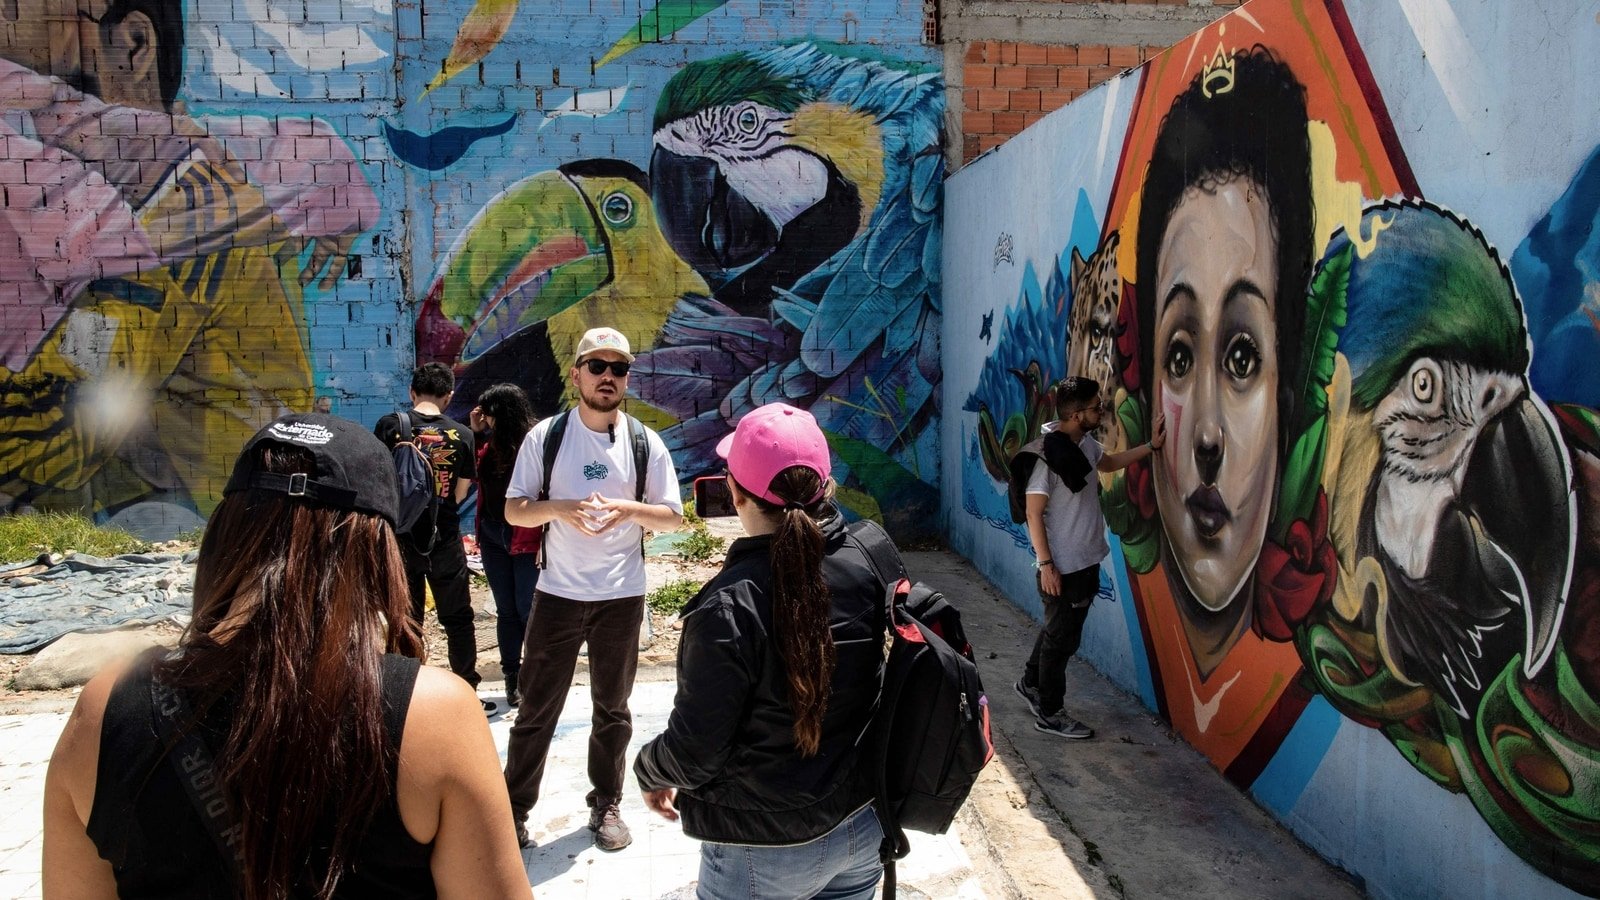 Ciudad Bolivar, one of Bogota's poorest neighborhoods, is attracting tourists with its cable car and colorful murals.